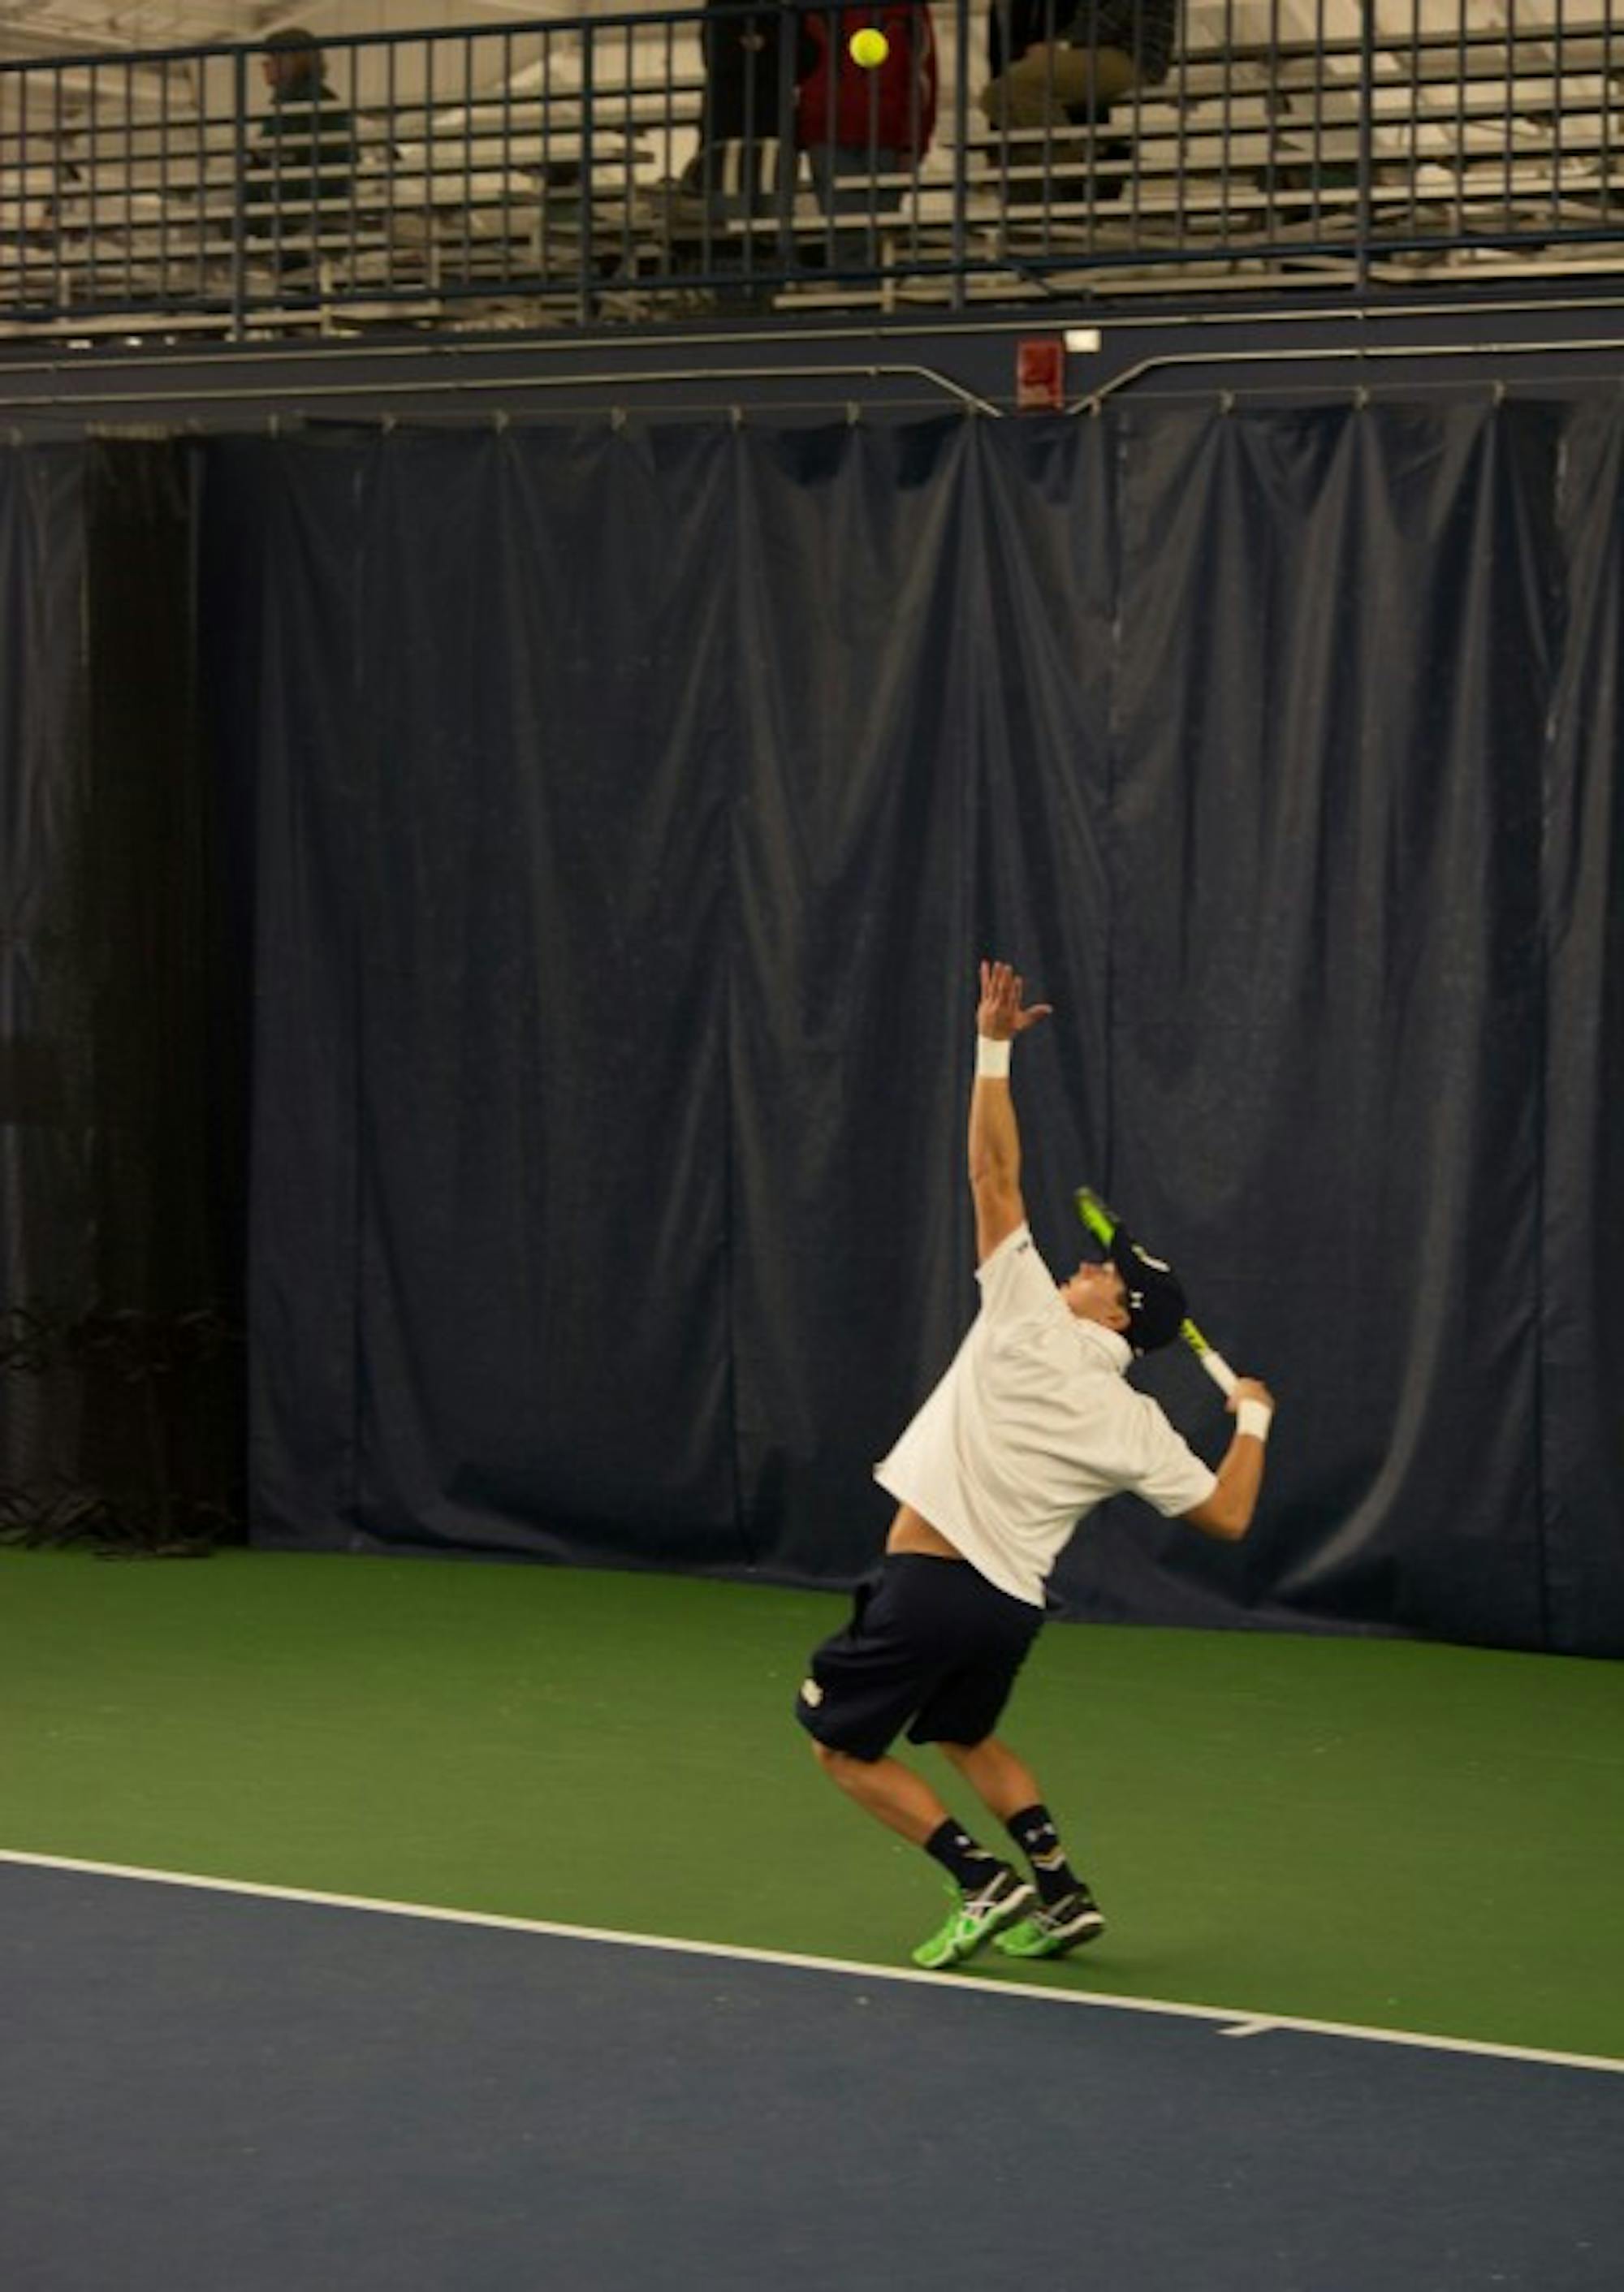 Irish junior Brendon Kempin tosses the ball for a serve during Notre Dame’s 5-2 win over Indiana on Feb. 7 at Eck Tennis Pavilion. Kempin’s doubles match went unfinished as the Irish won before it came to an end.